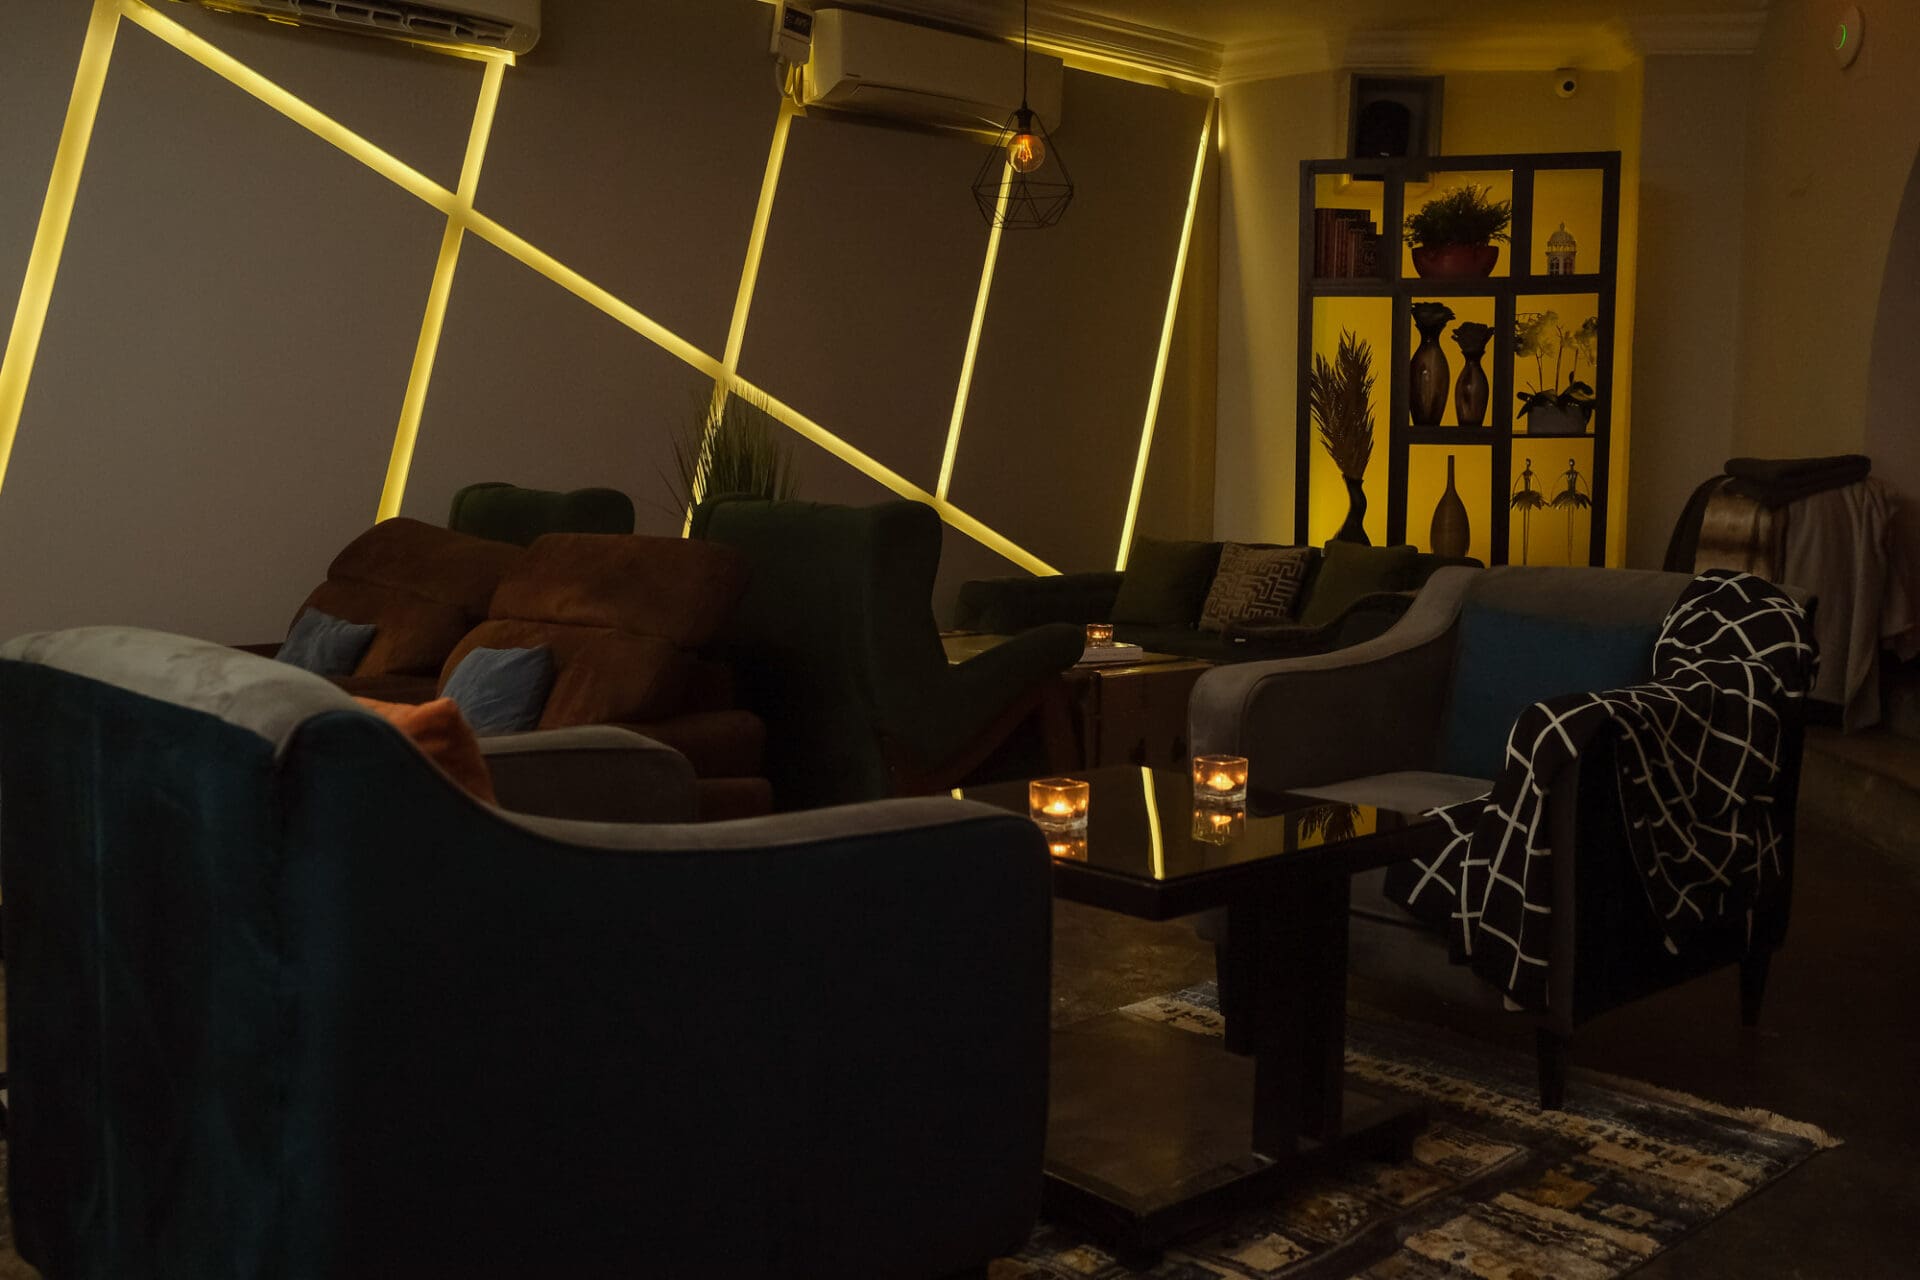 The best restaurants in Lagos, Nigeria: dimly lit interiors at The House